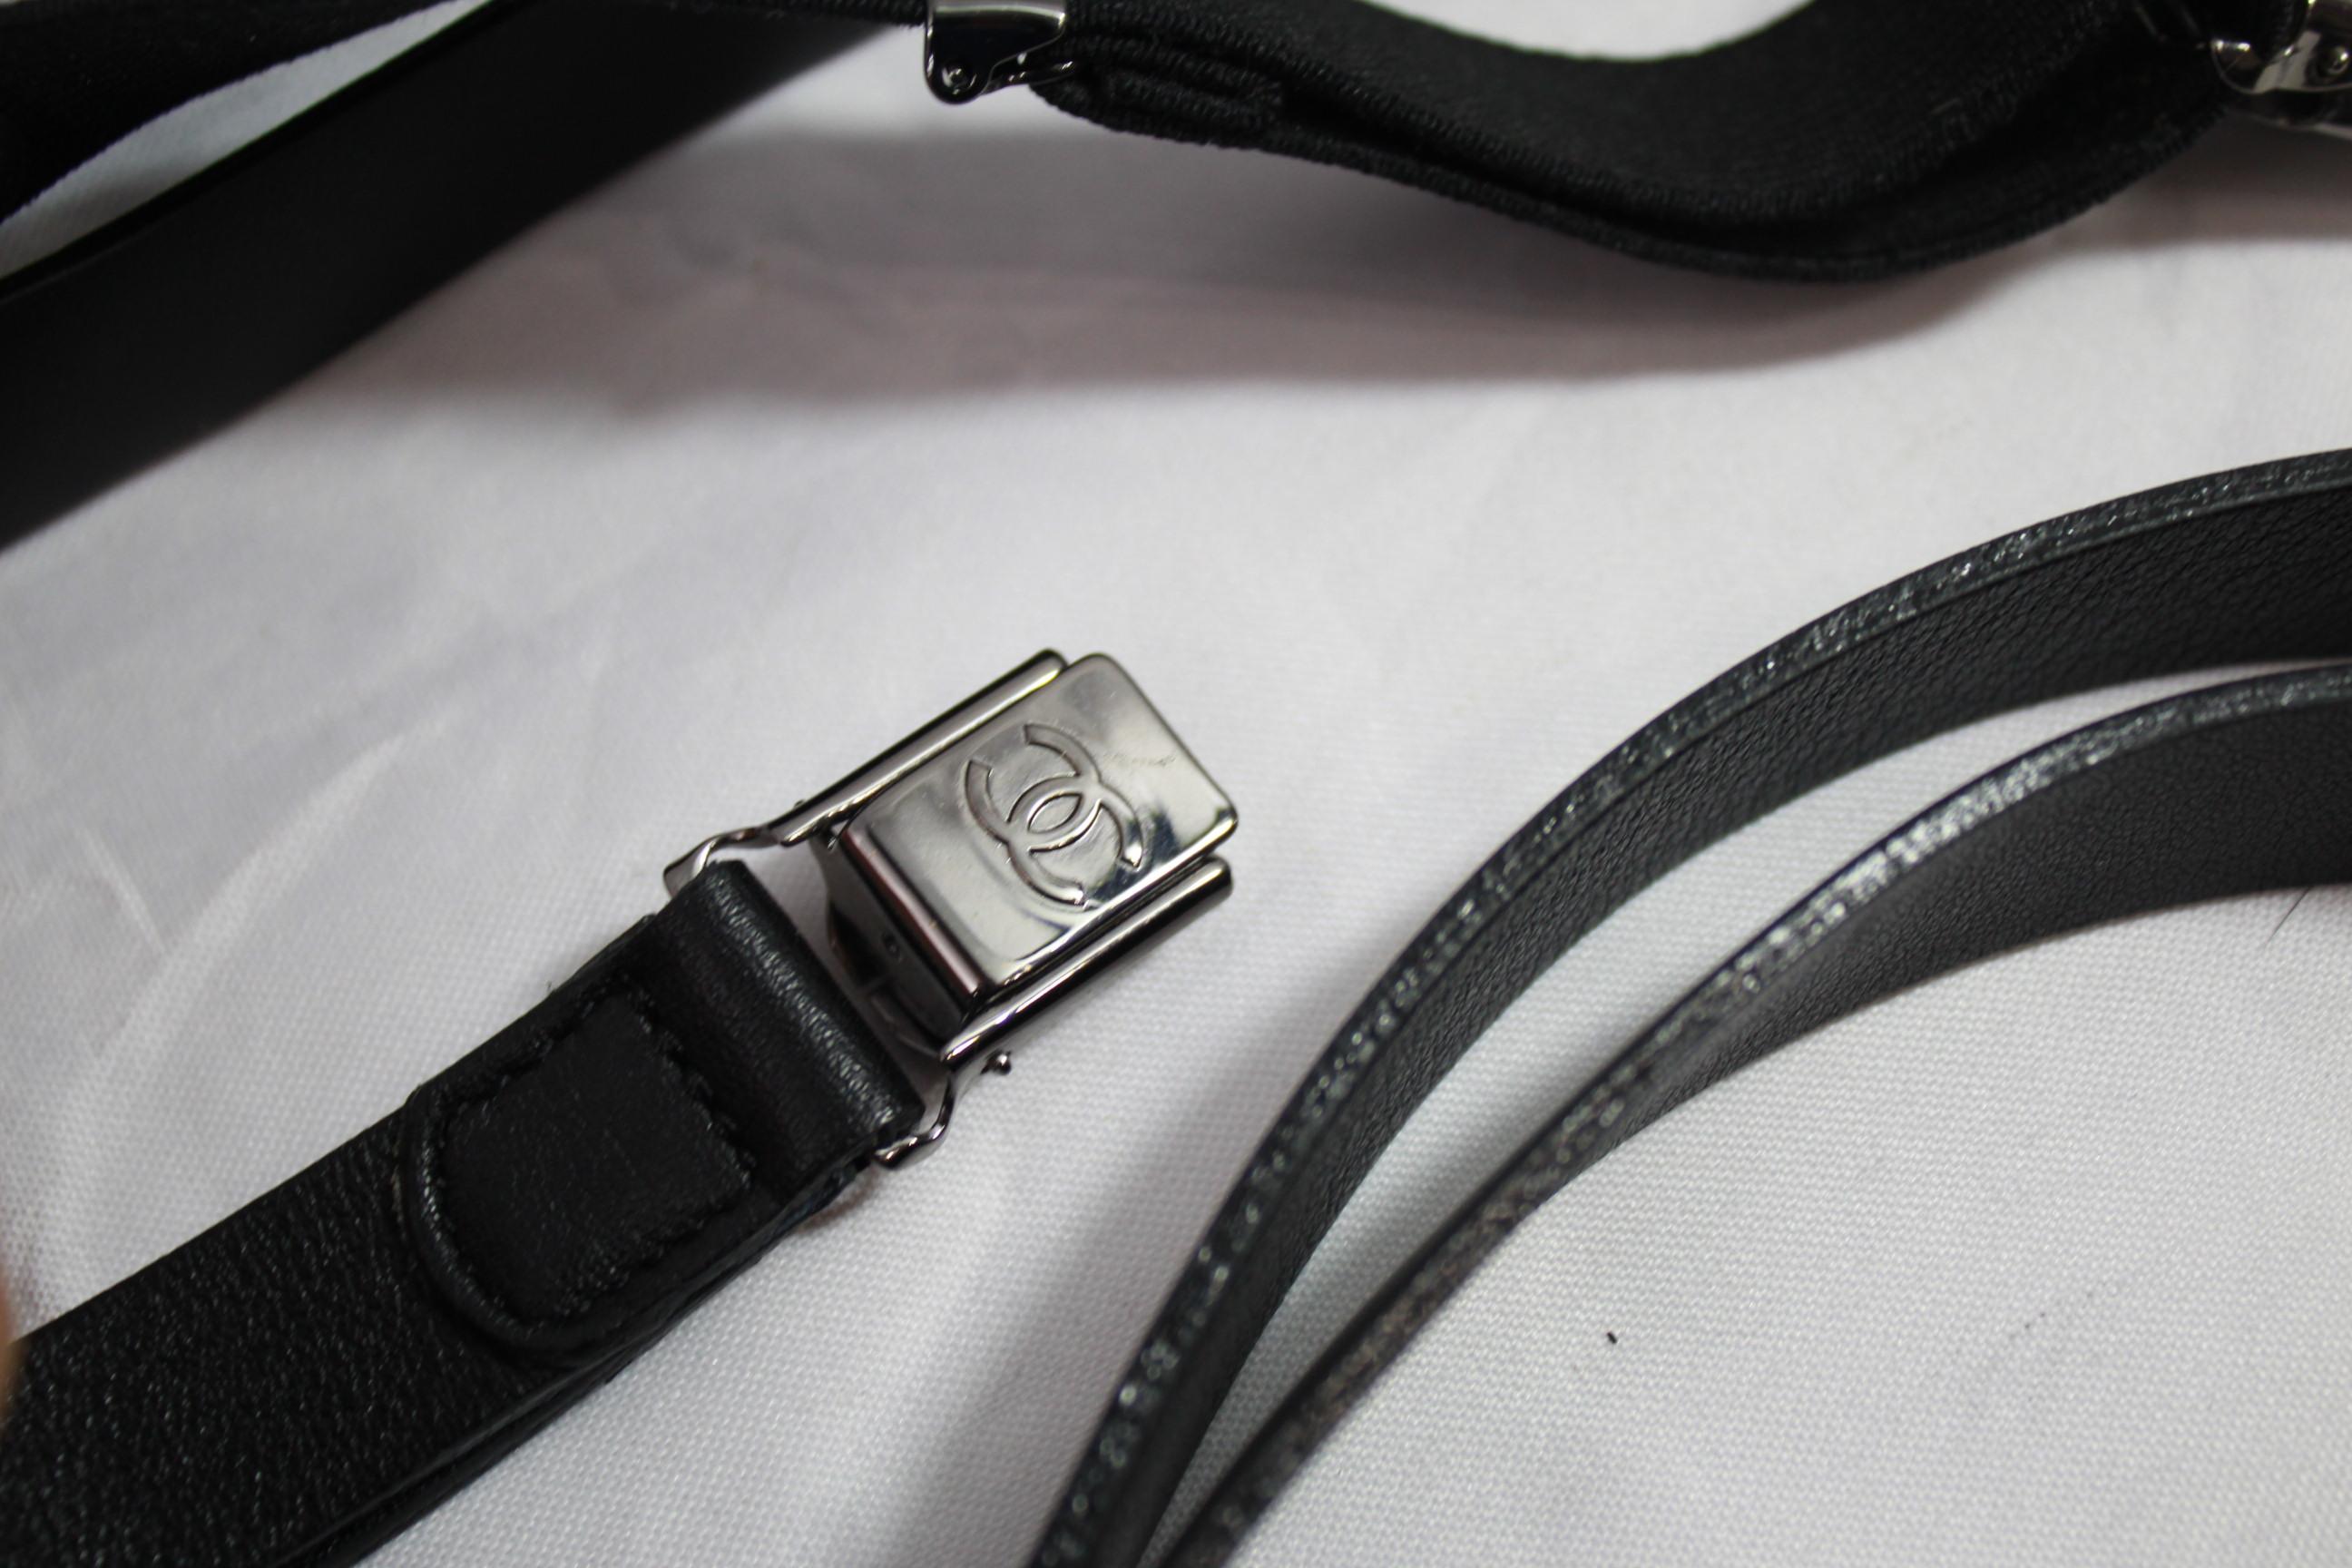 Iconic Chanel suspenders from the 2003 Collection
Excellent condition
Lenght 103 cm

